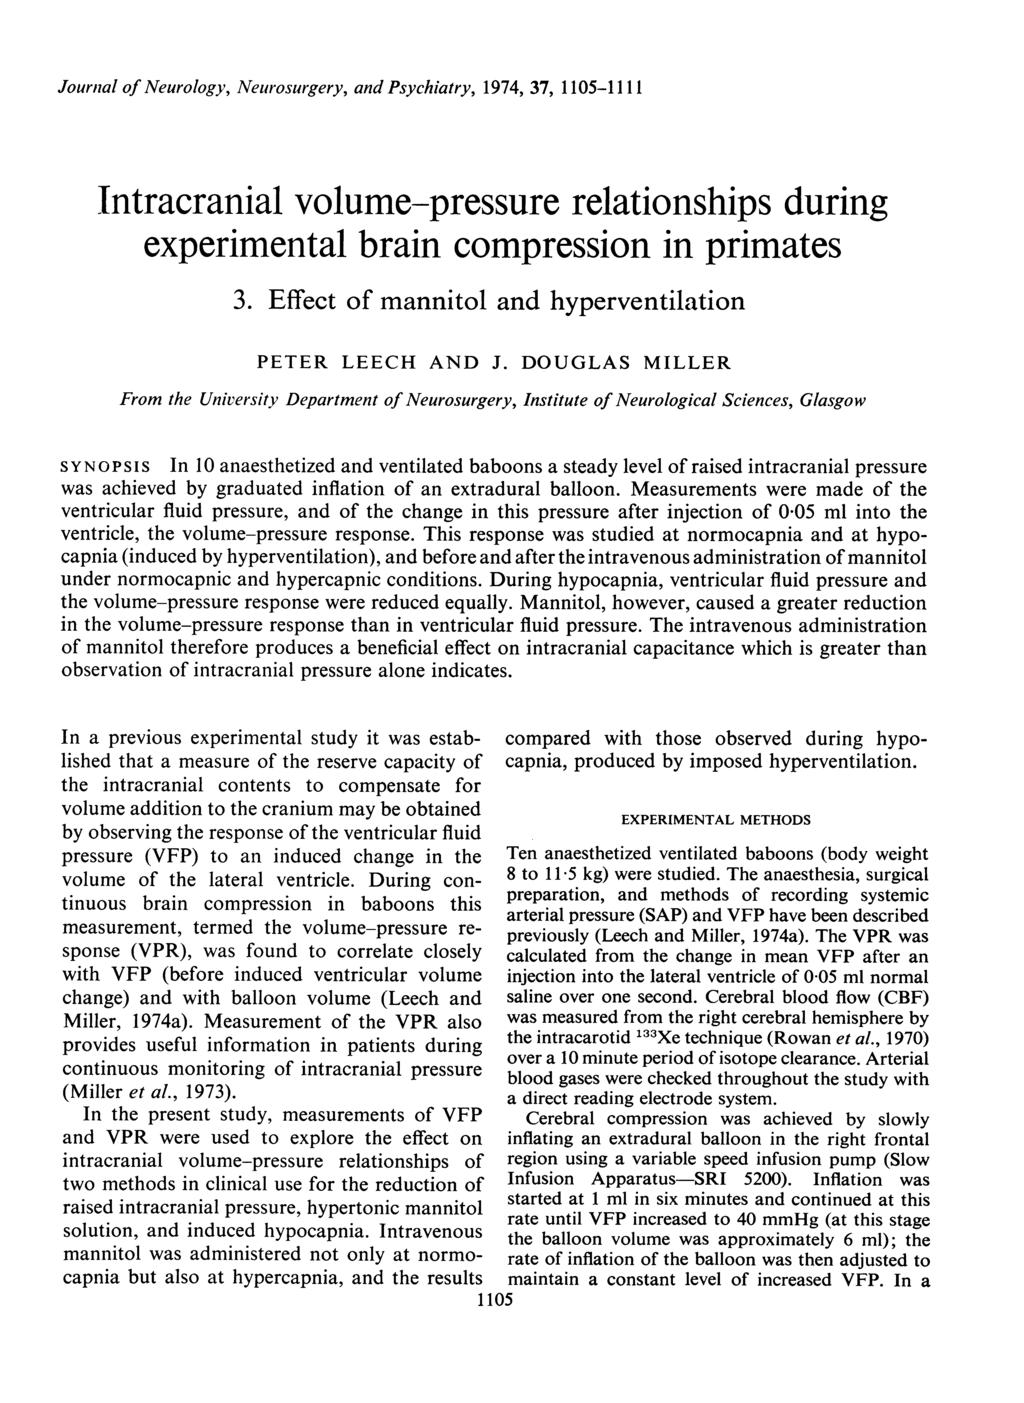 Journial of Neurology, Neurosurgery, and Psychiatry, 1974, 37, 115-1111 Intracranial volume-pressure relationships during experimental brain compression in primates 3.